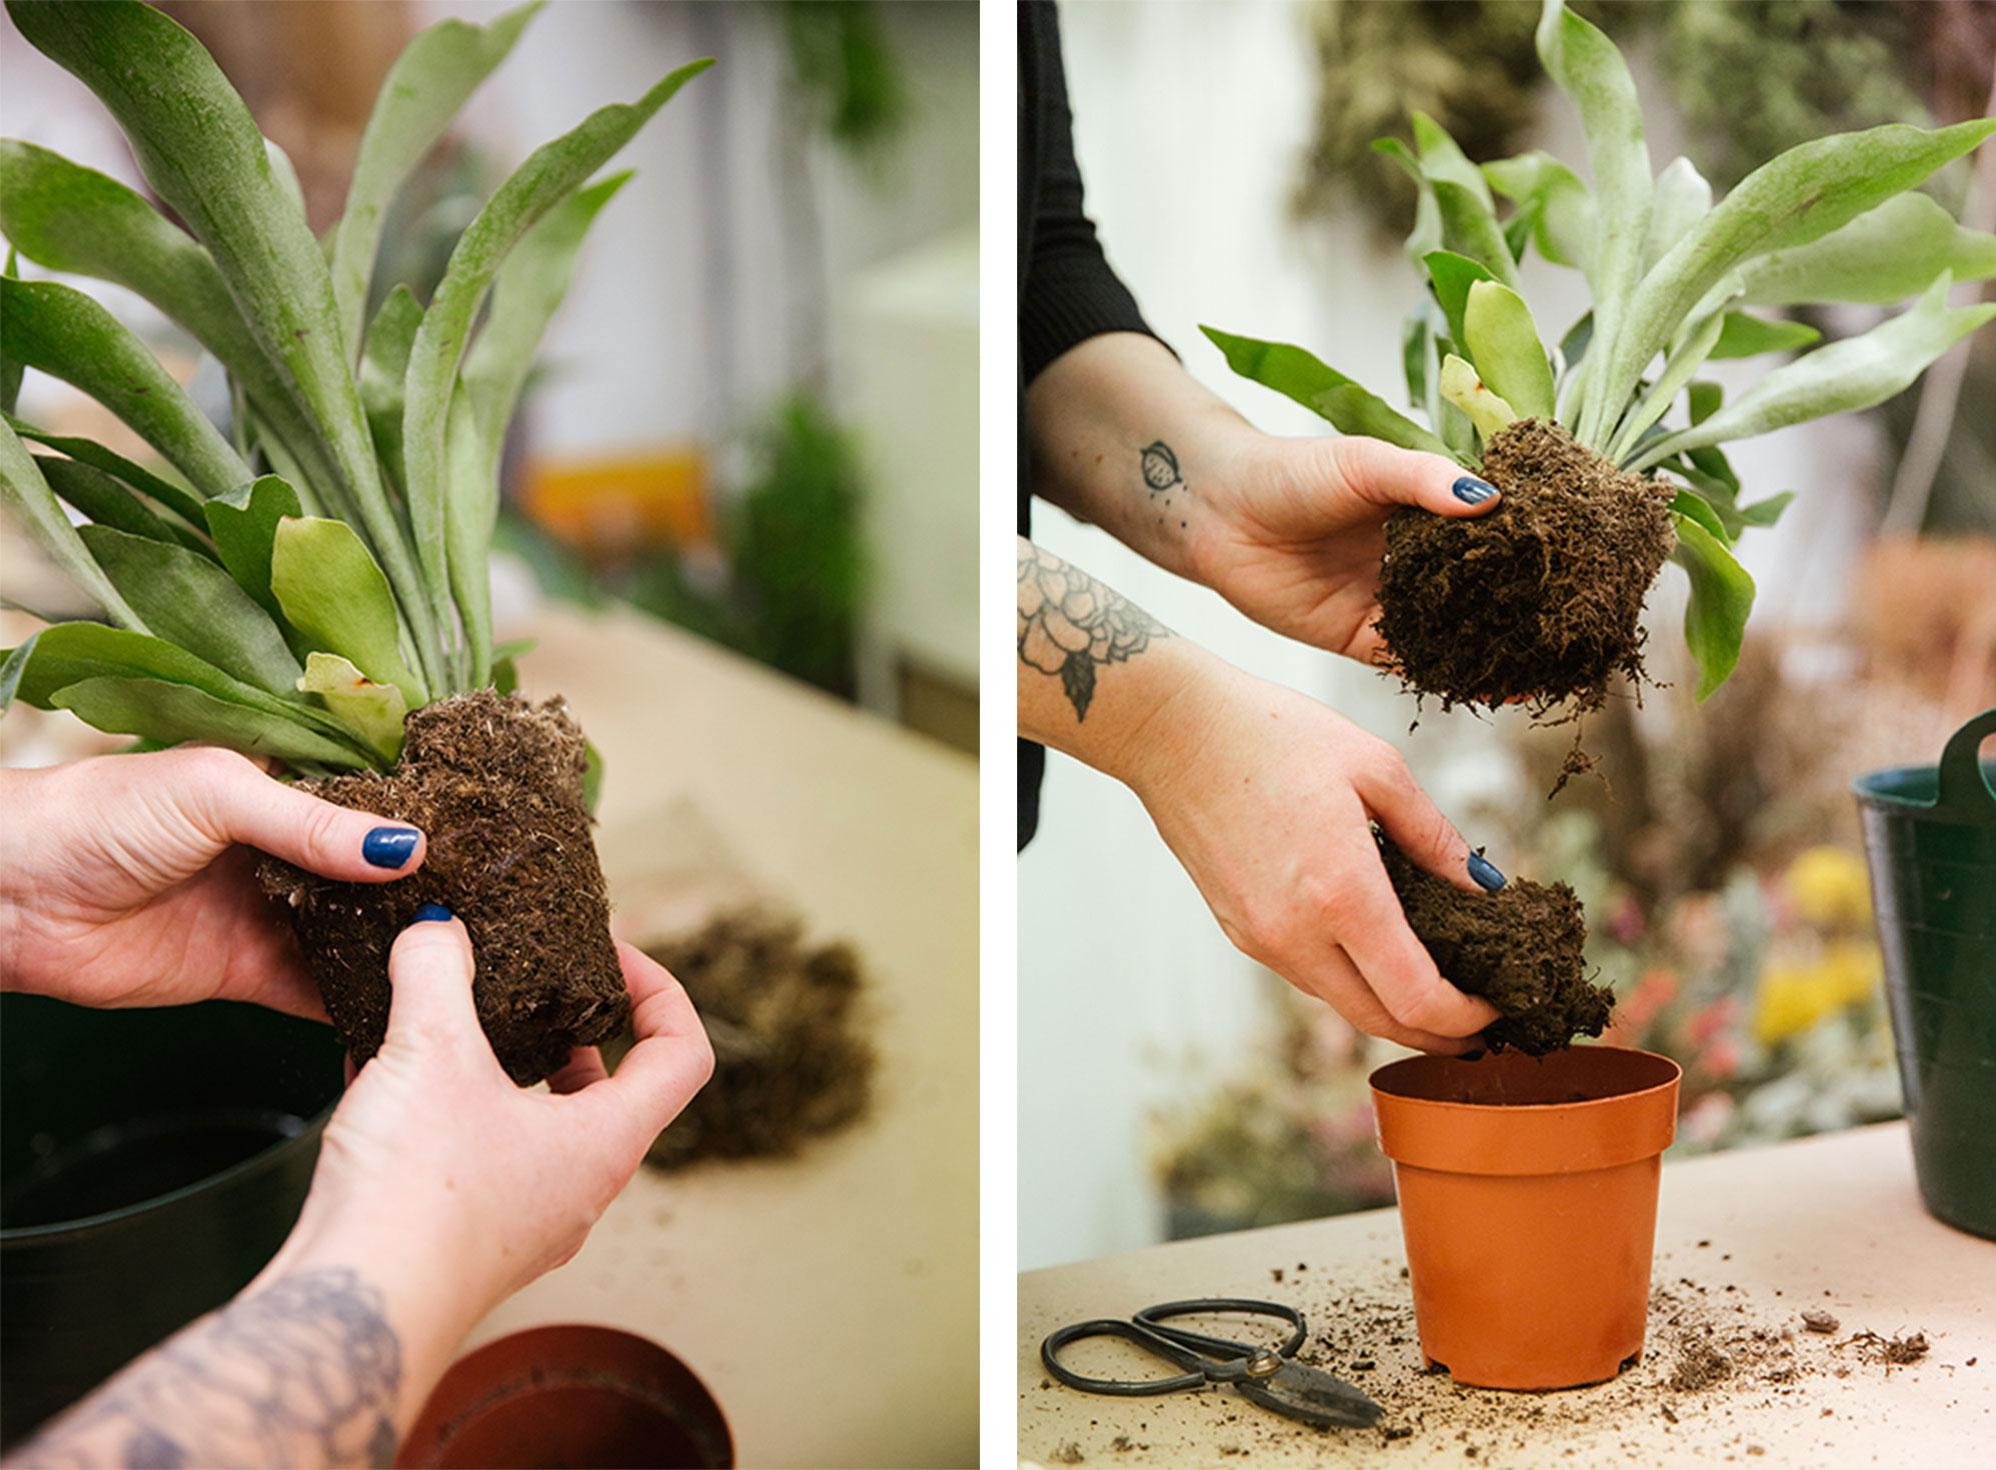 Start decanting the plant from its pot, making sure to separate the soil